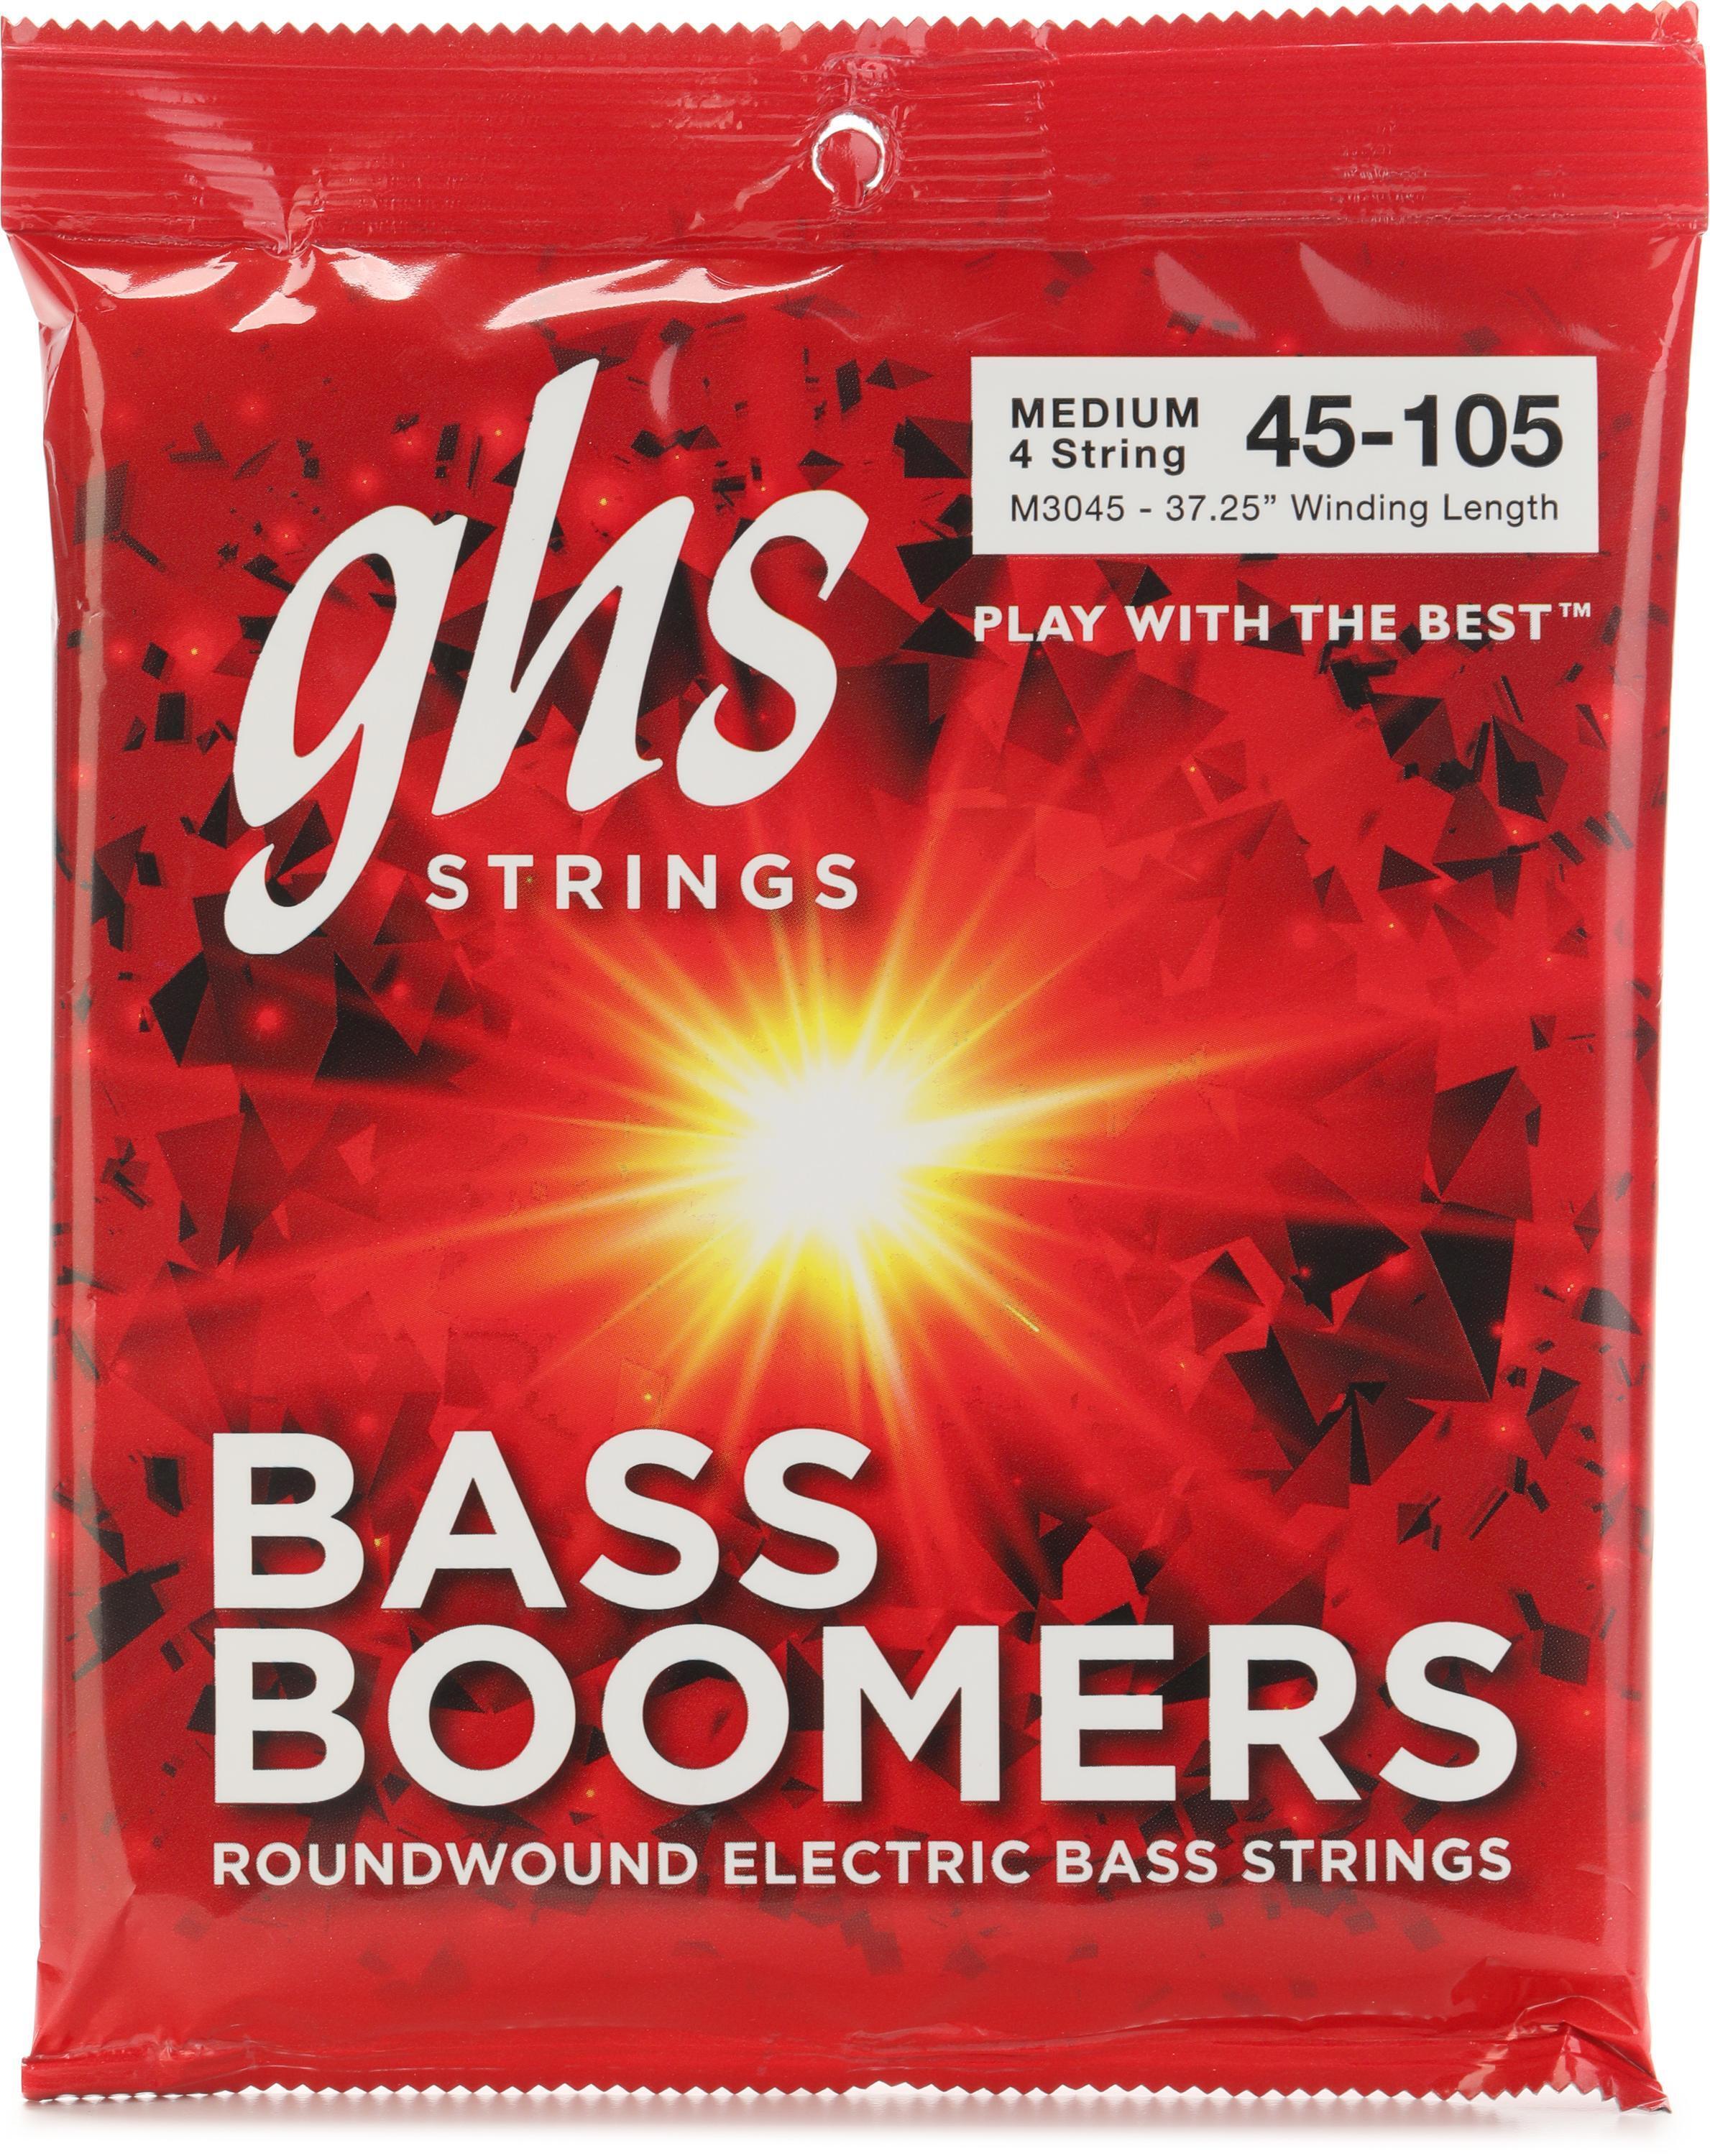 Bundled Item: GHS M3045 Bass Boomers Roundwound Electric Bass Guitar Strings - .045-.105 Medium Long Scale